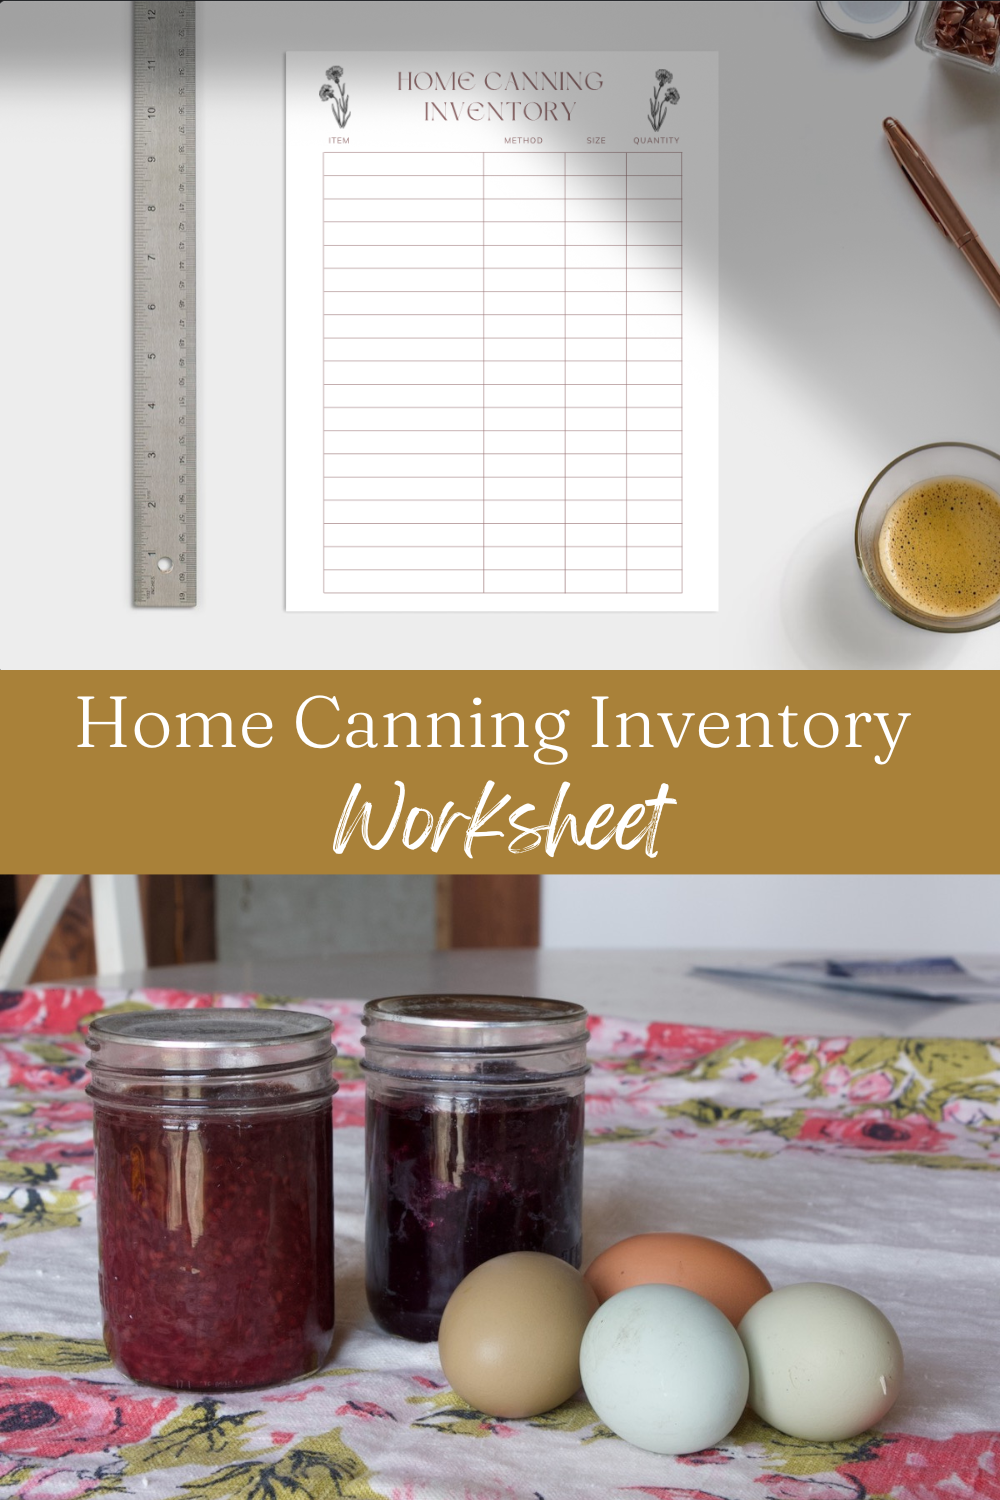 pantry inventory chart on top and jars of jam and eggs on a flower table cloth below